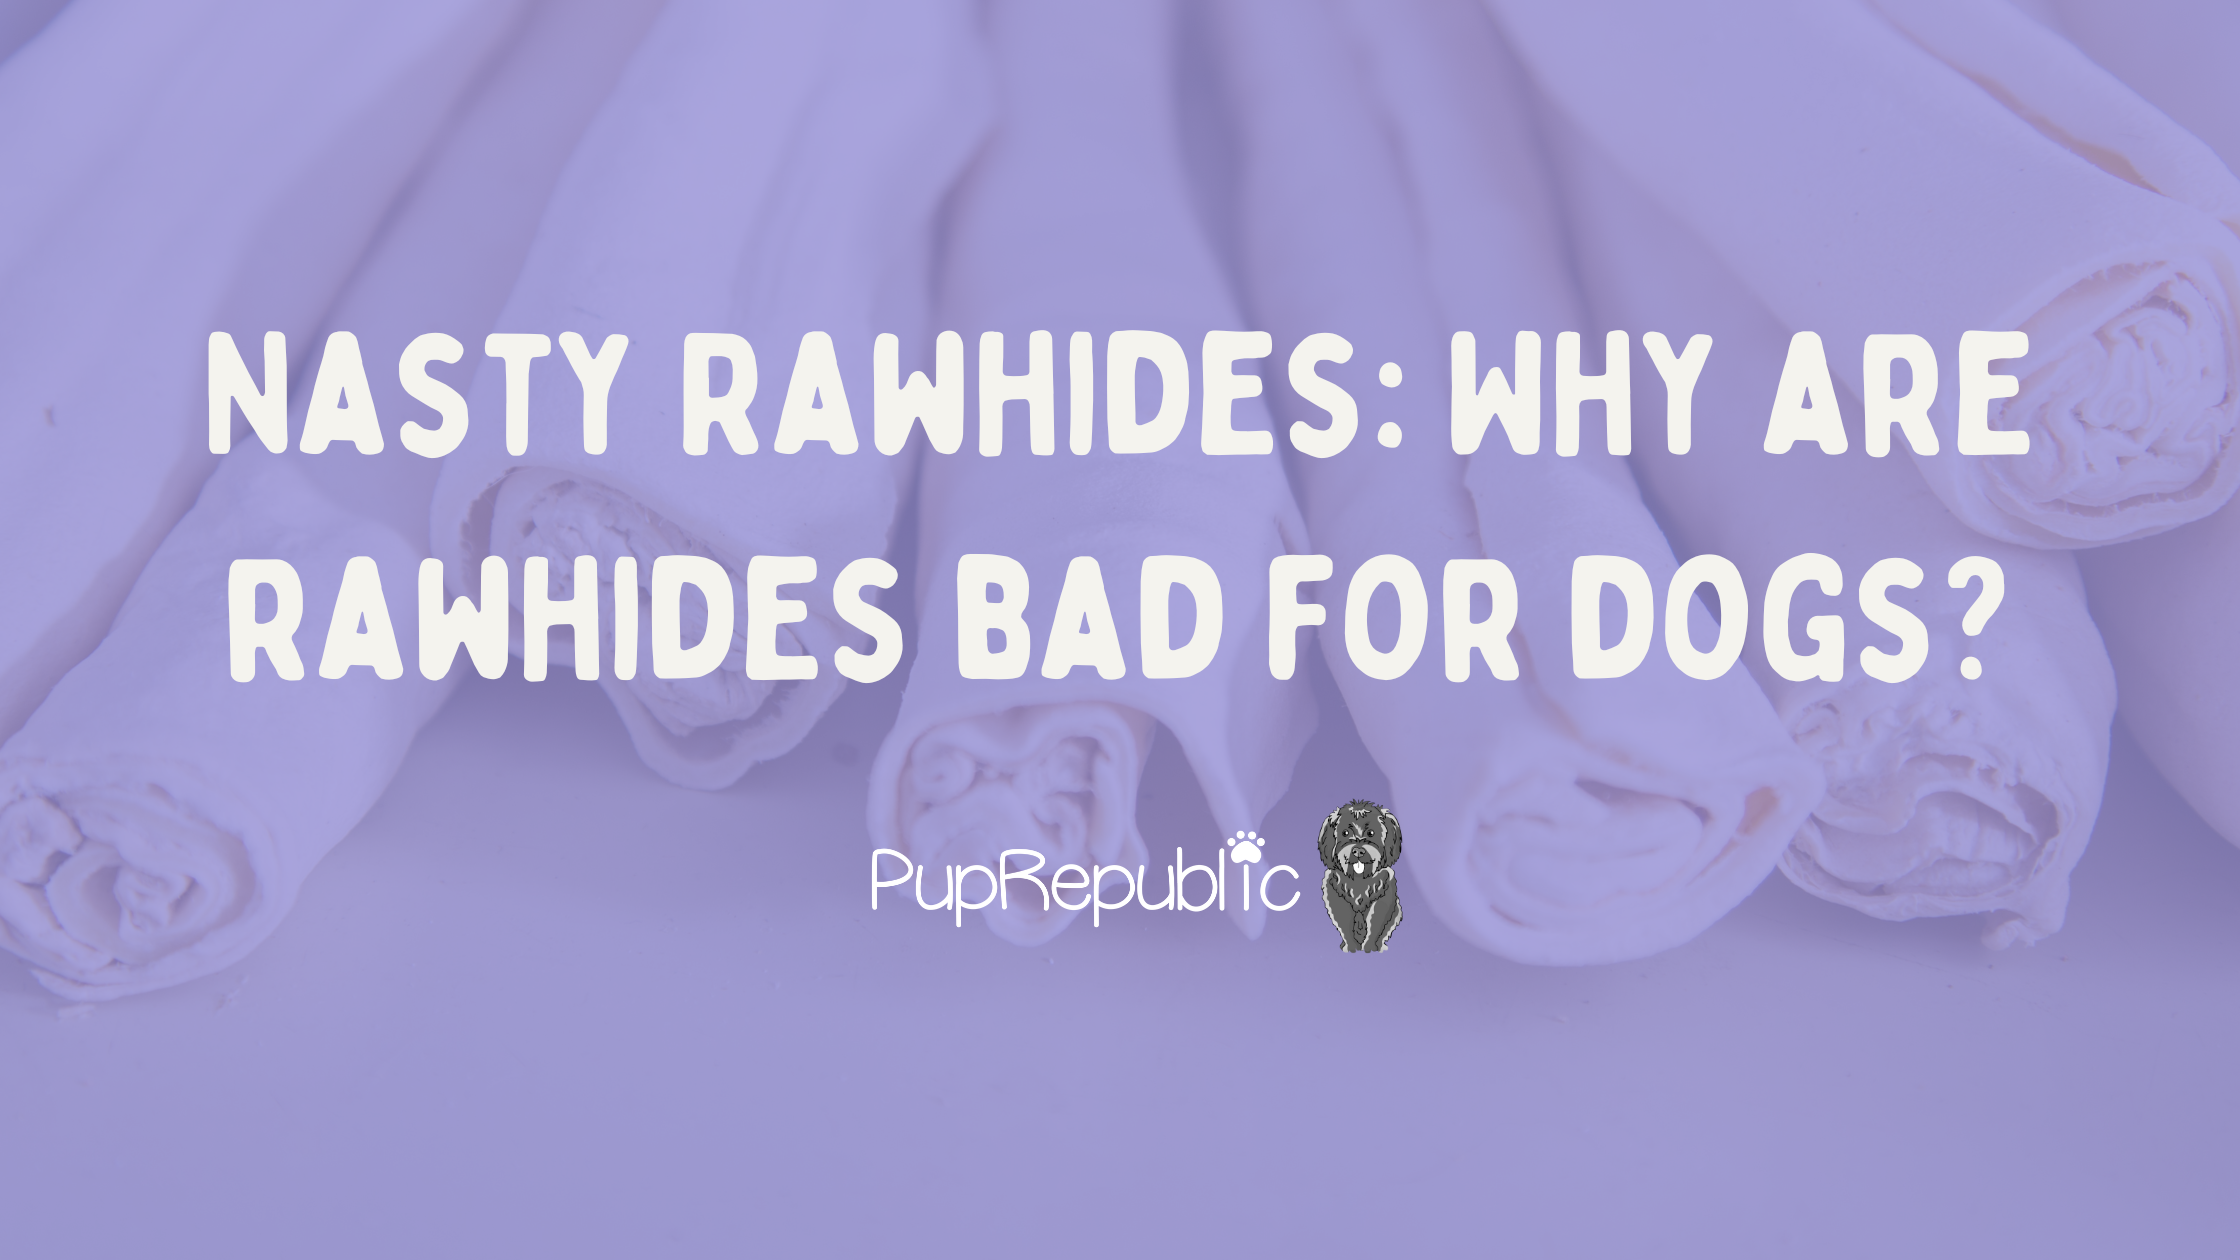 Are rawhides bad for dogs?